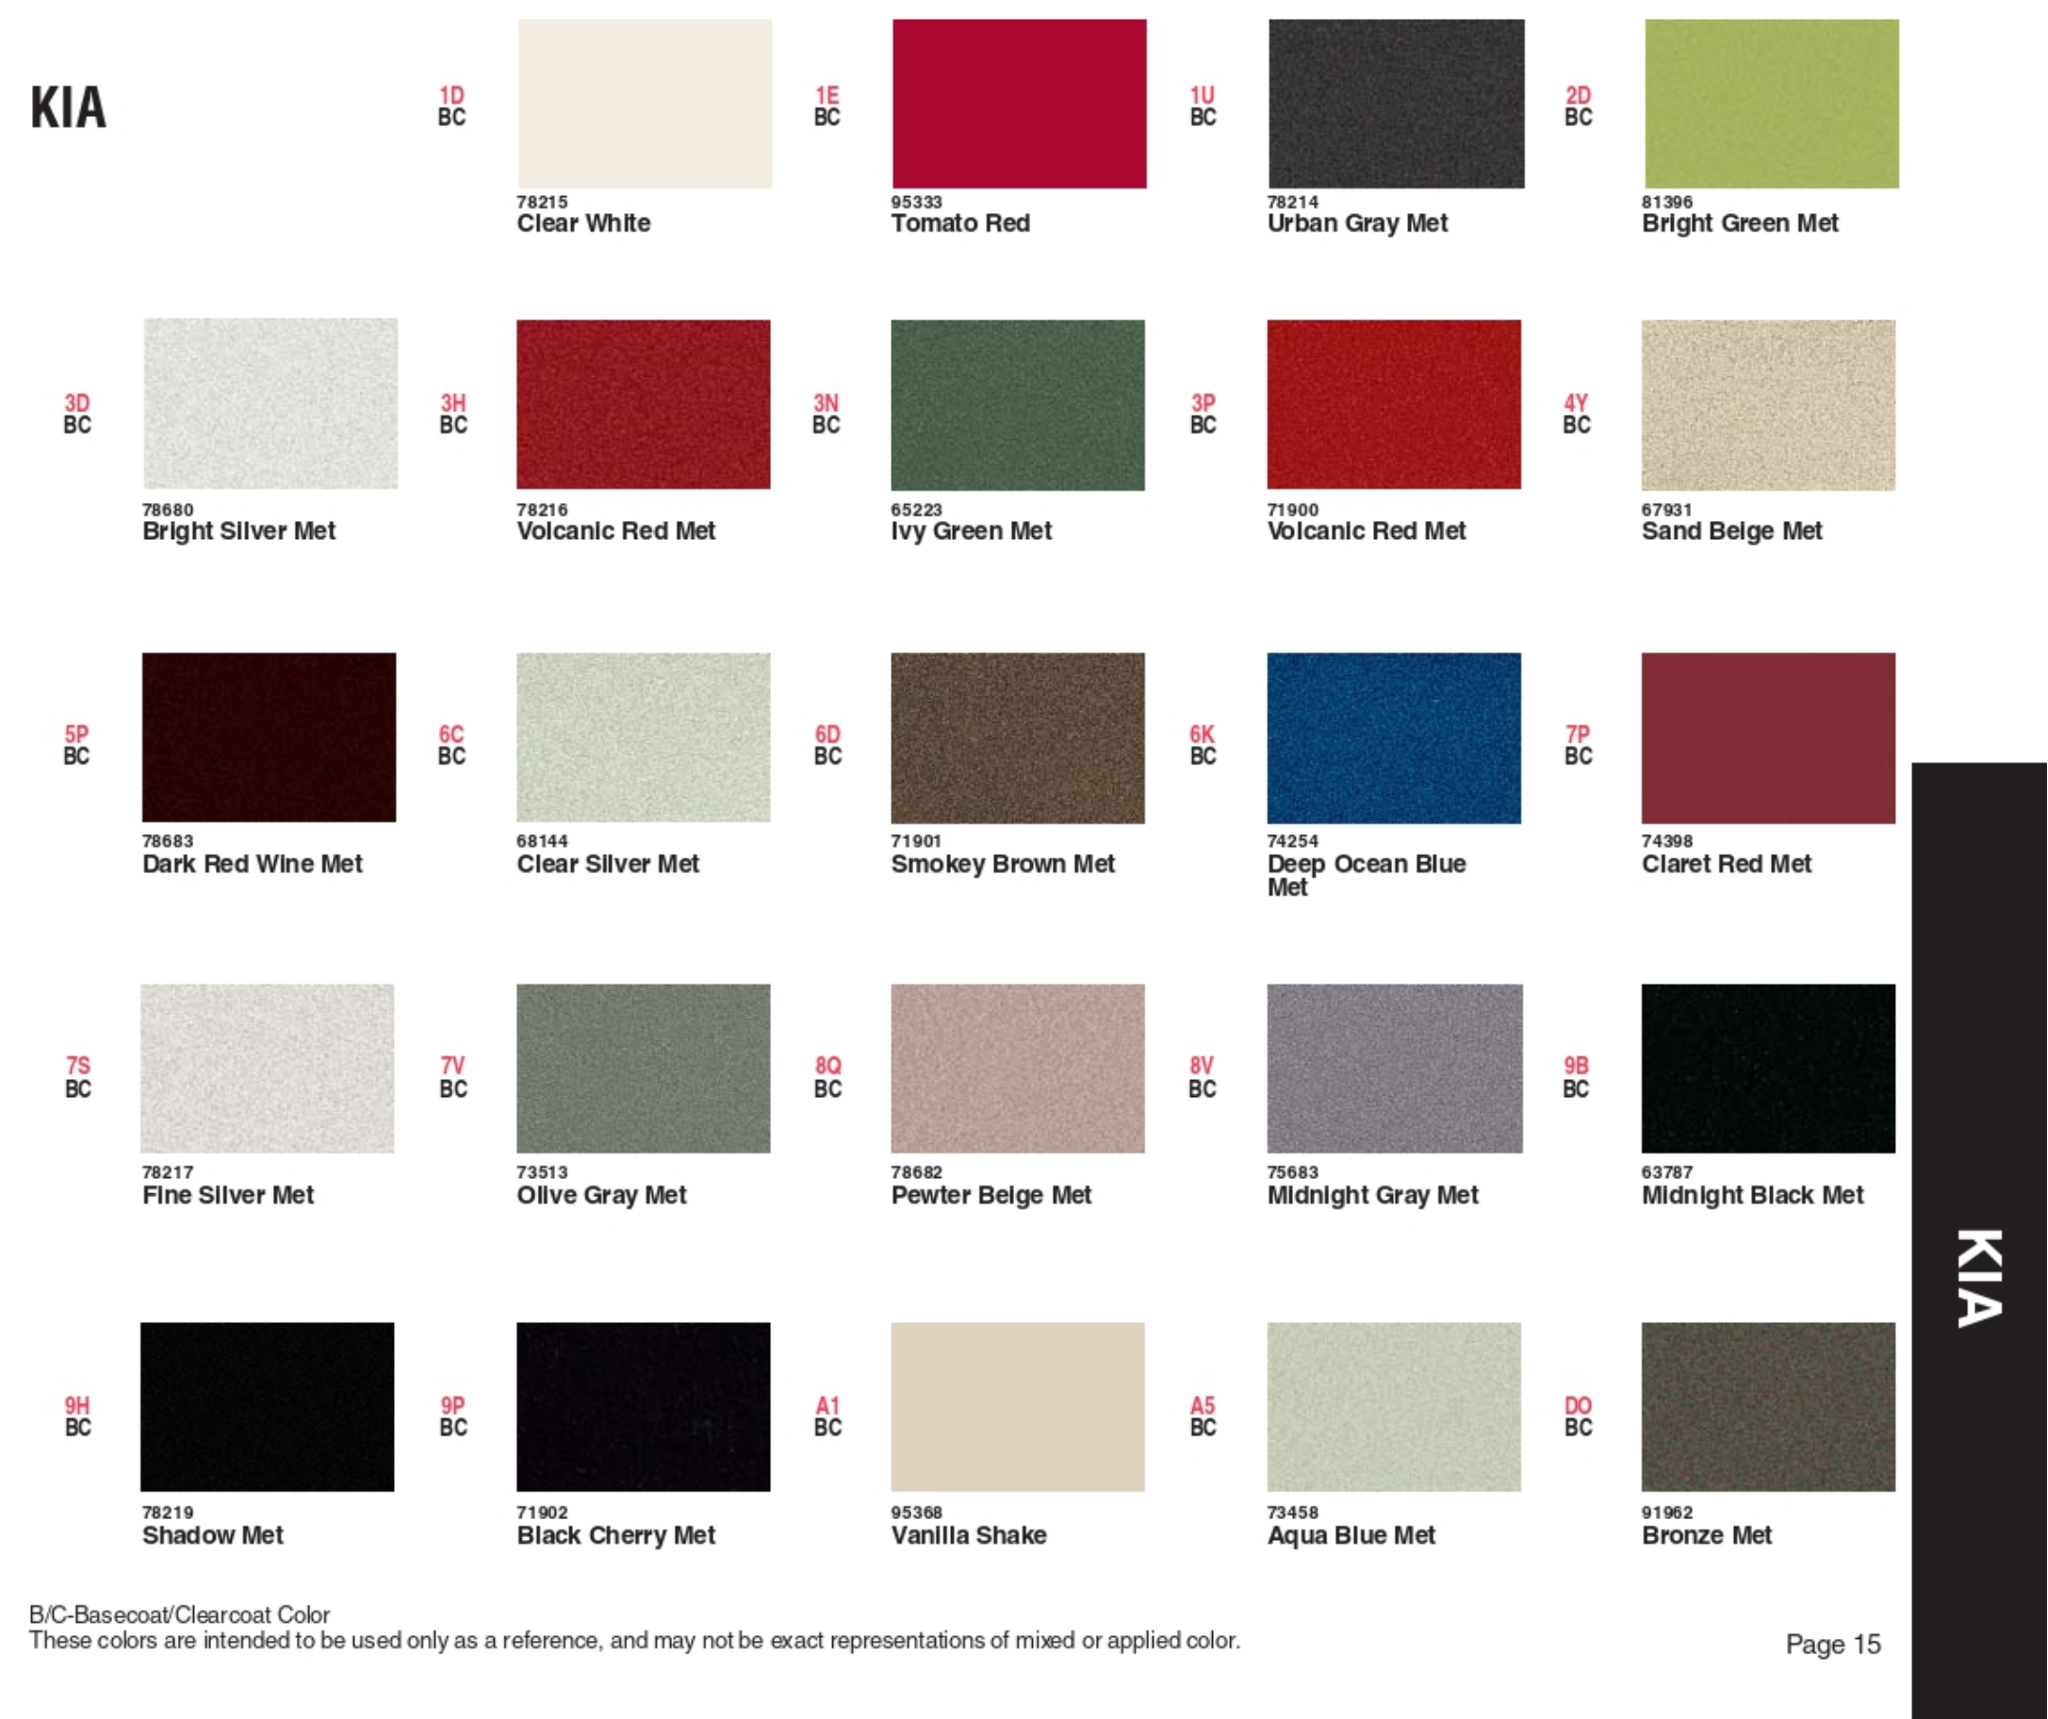 Paint Swatches and Color Codes for Kia's in 2009